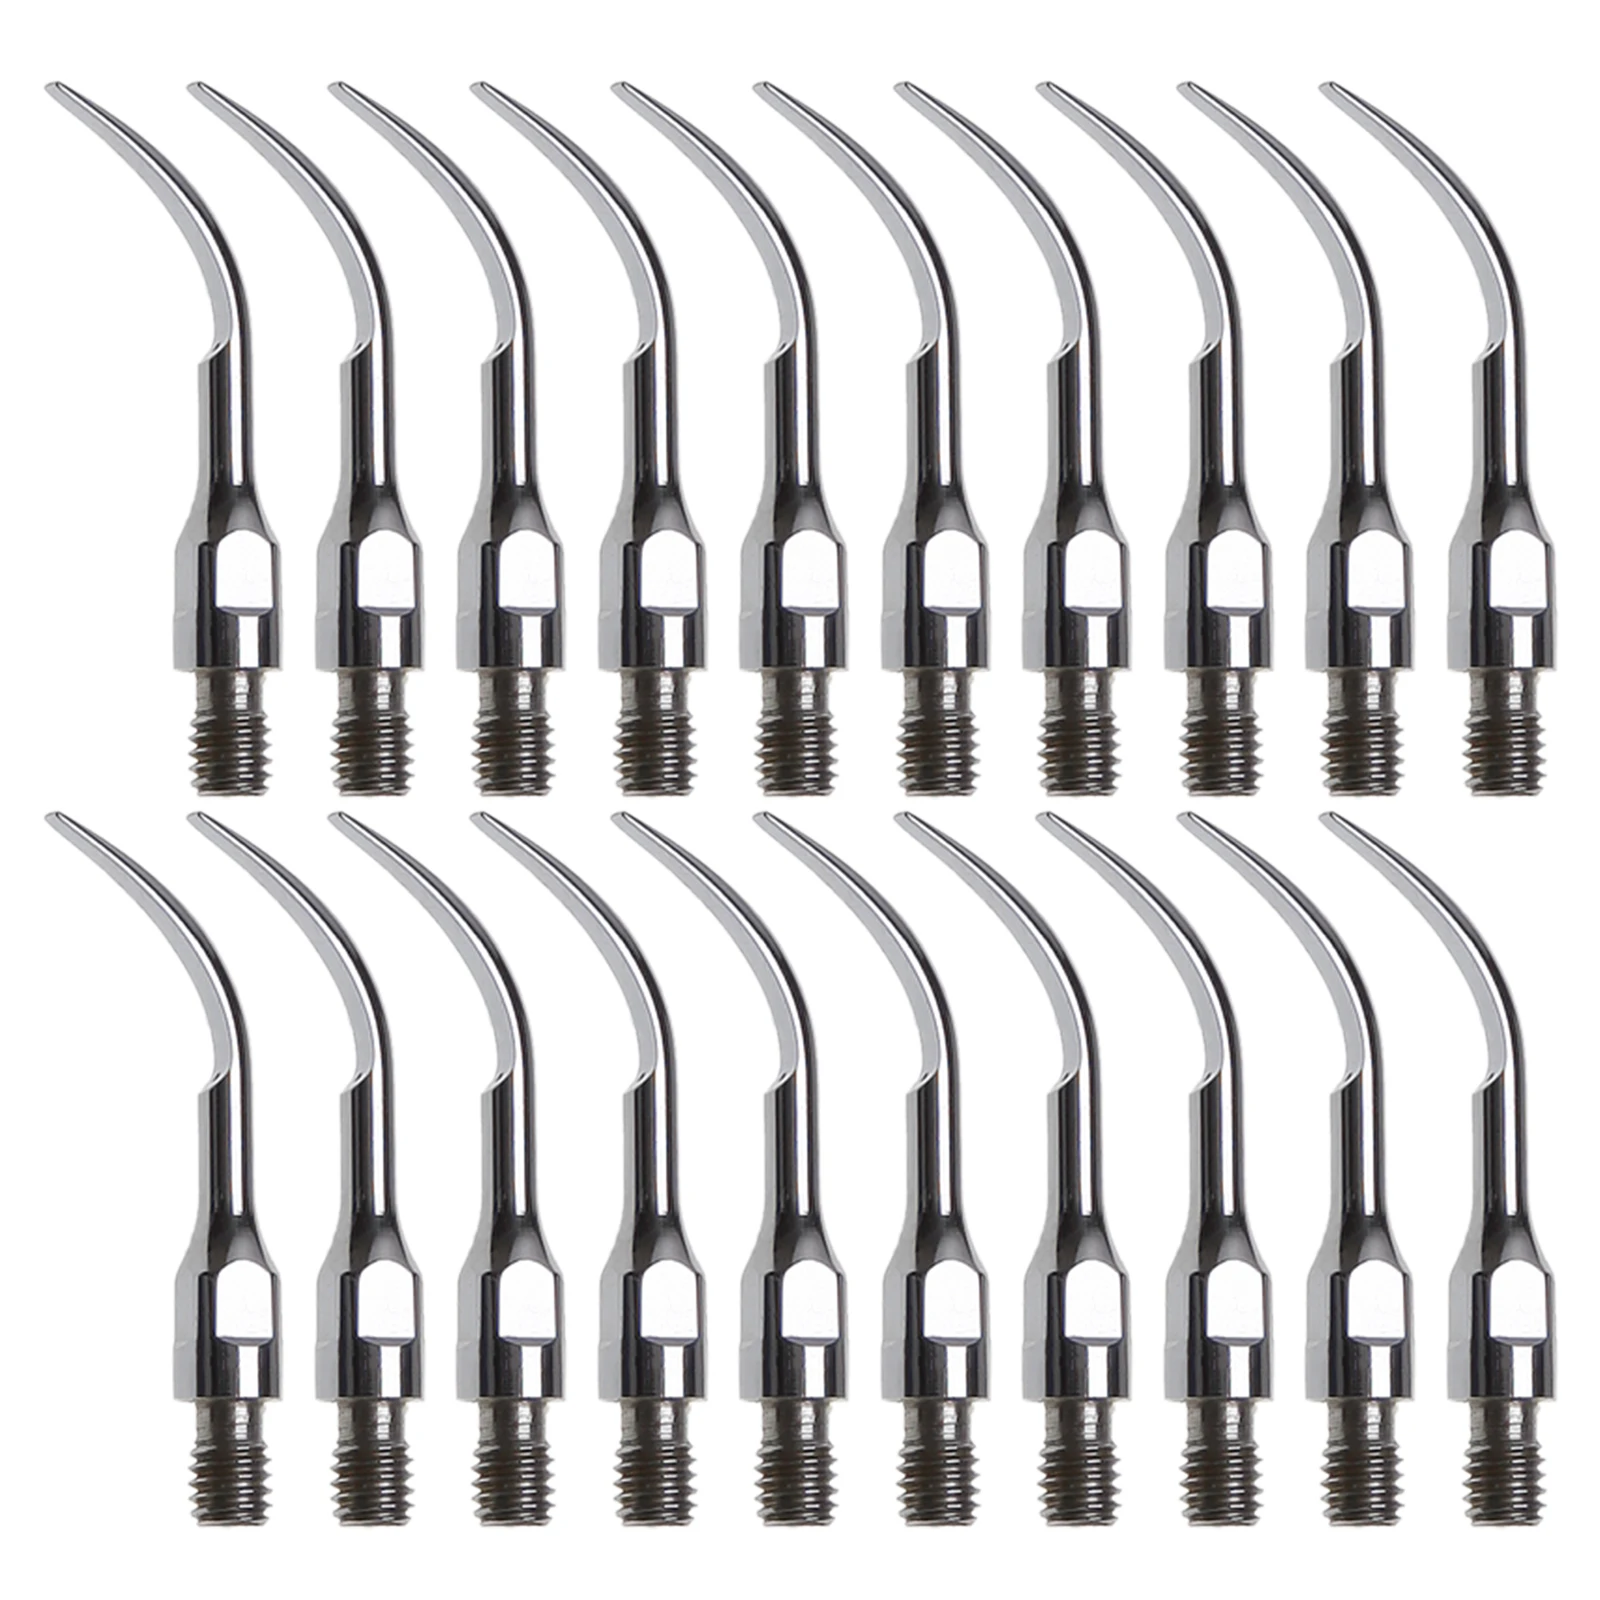 SKYSEA 20Pcs Dental Ultrasonic Scaling Tip GS2 Compatible with SIRONA Scaler Handpiece CW